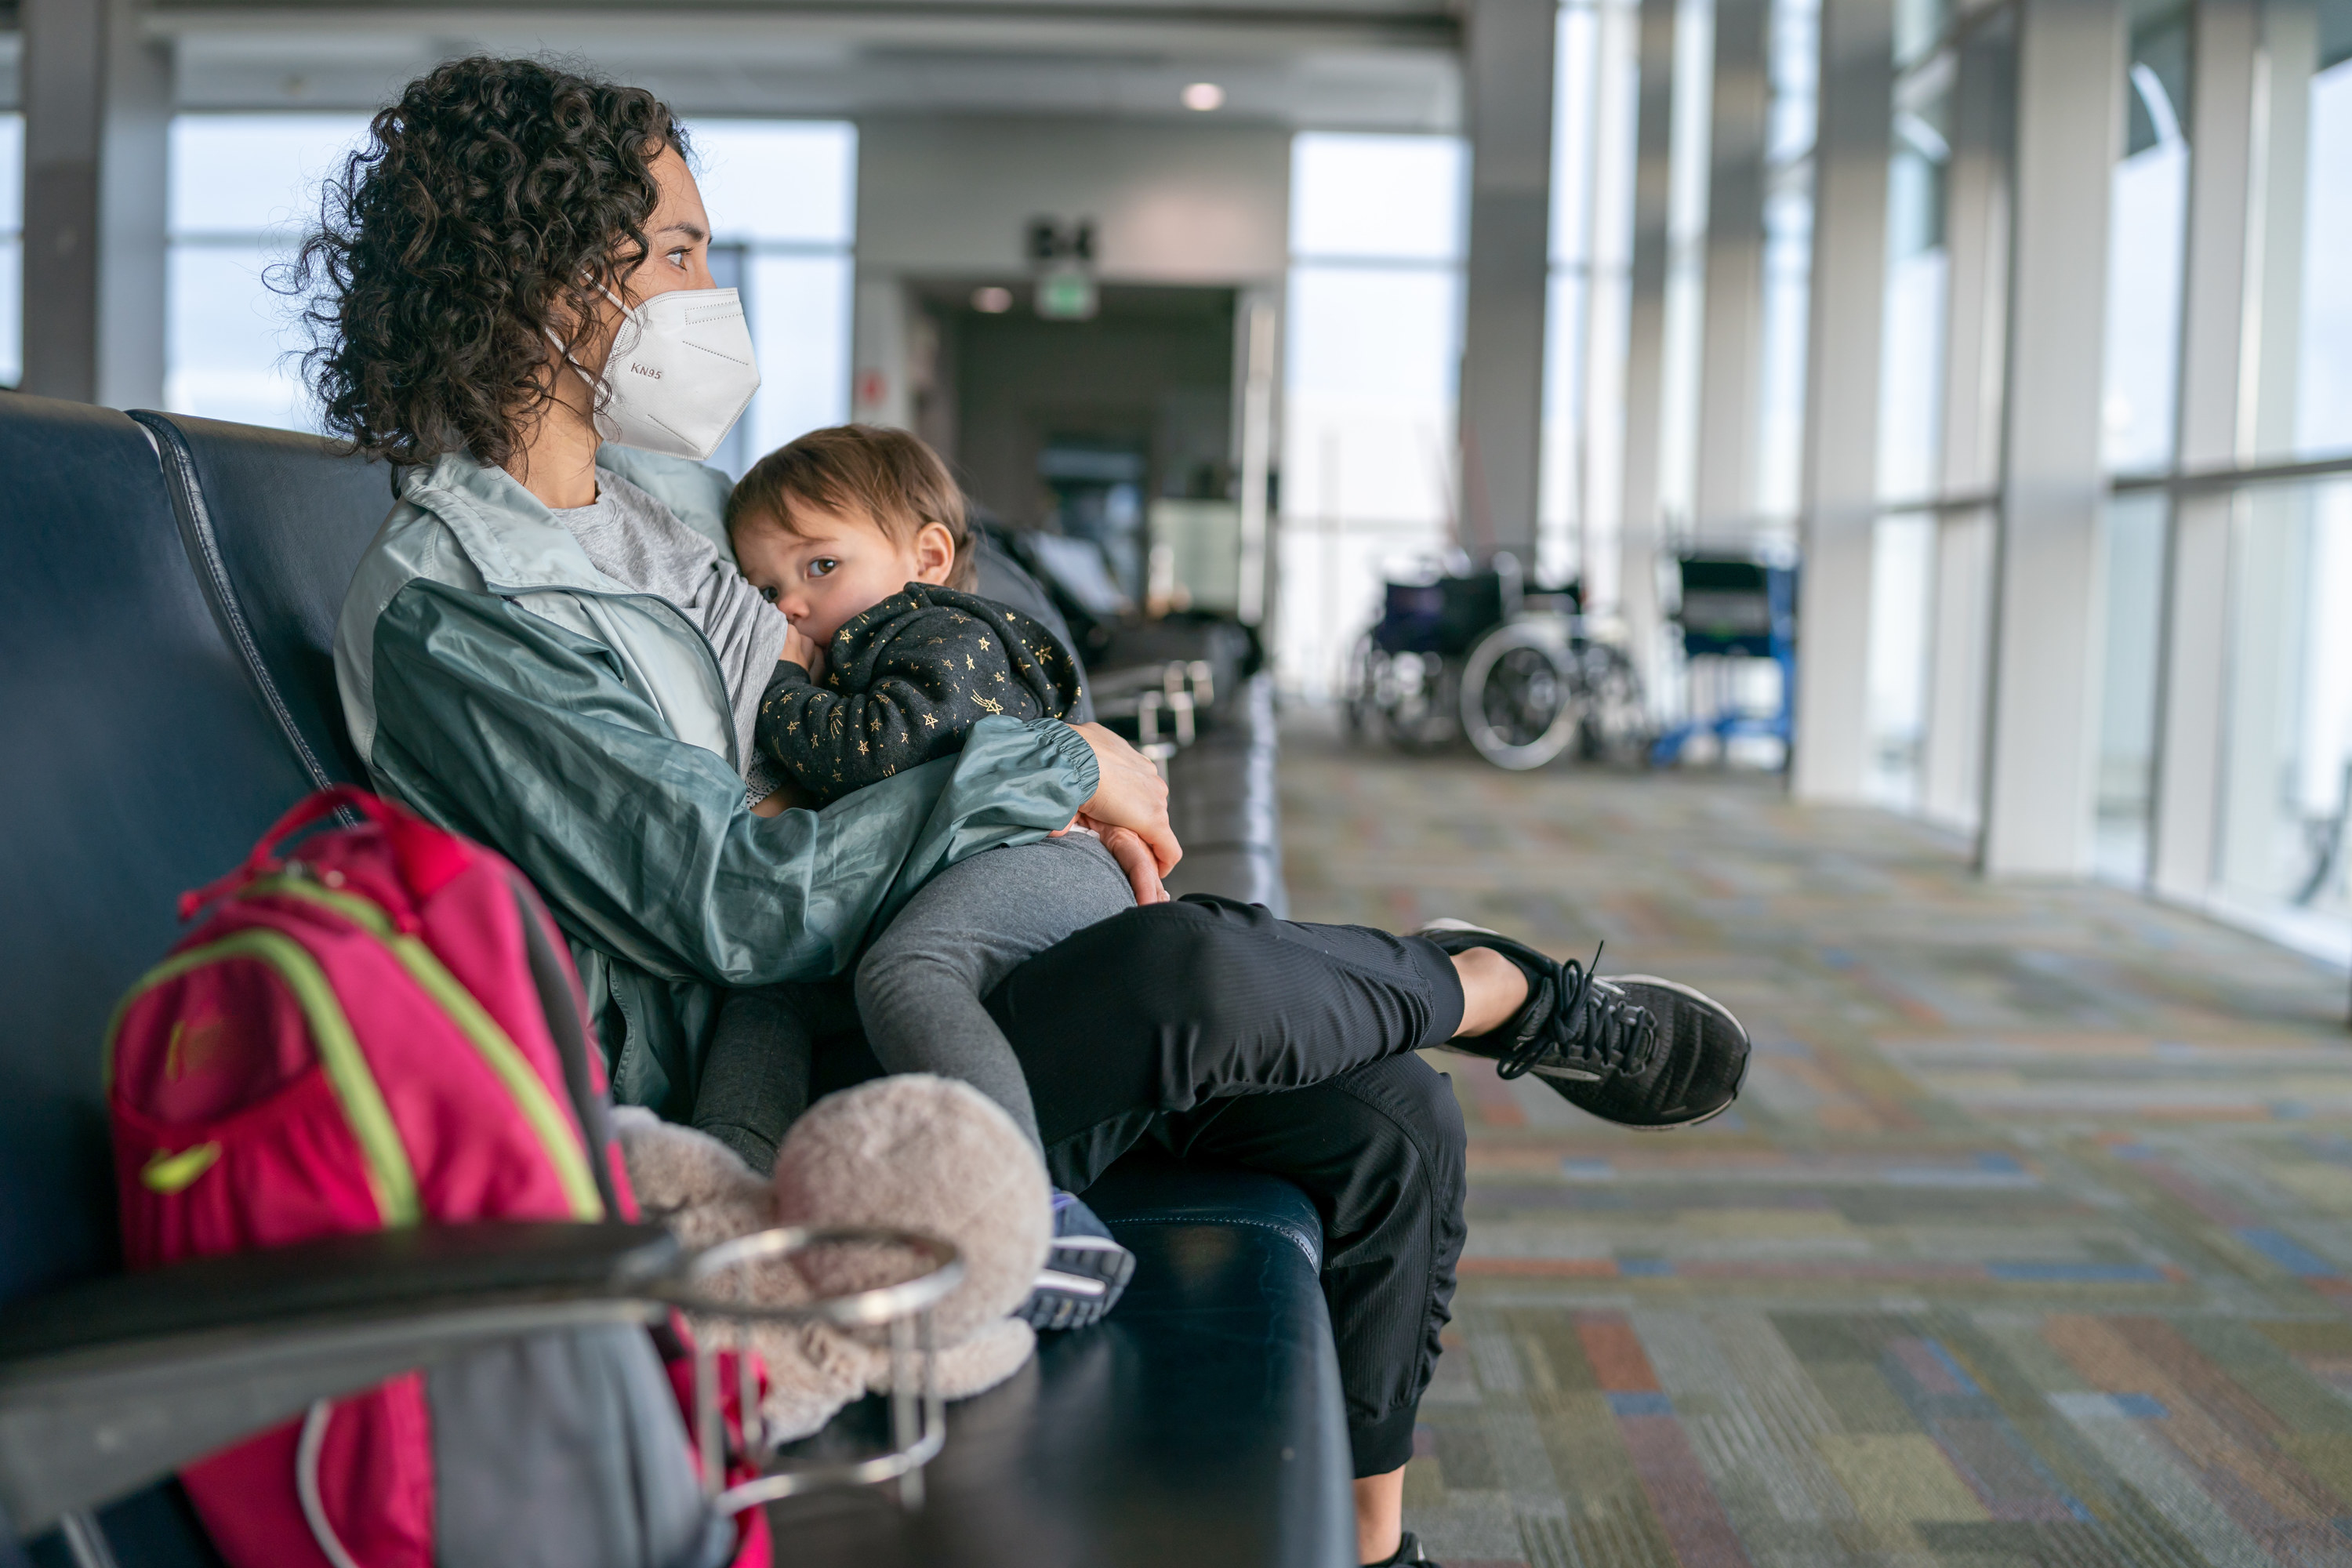 Woman holding baby in the airport